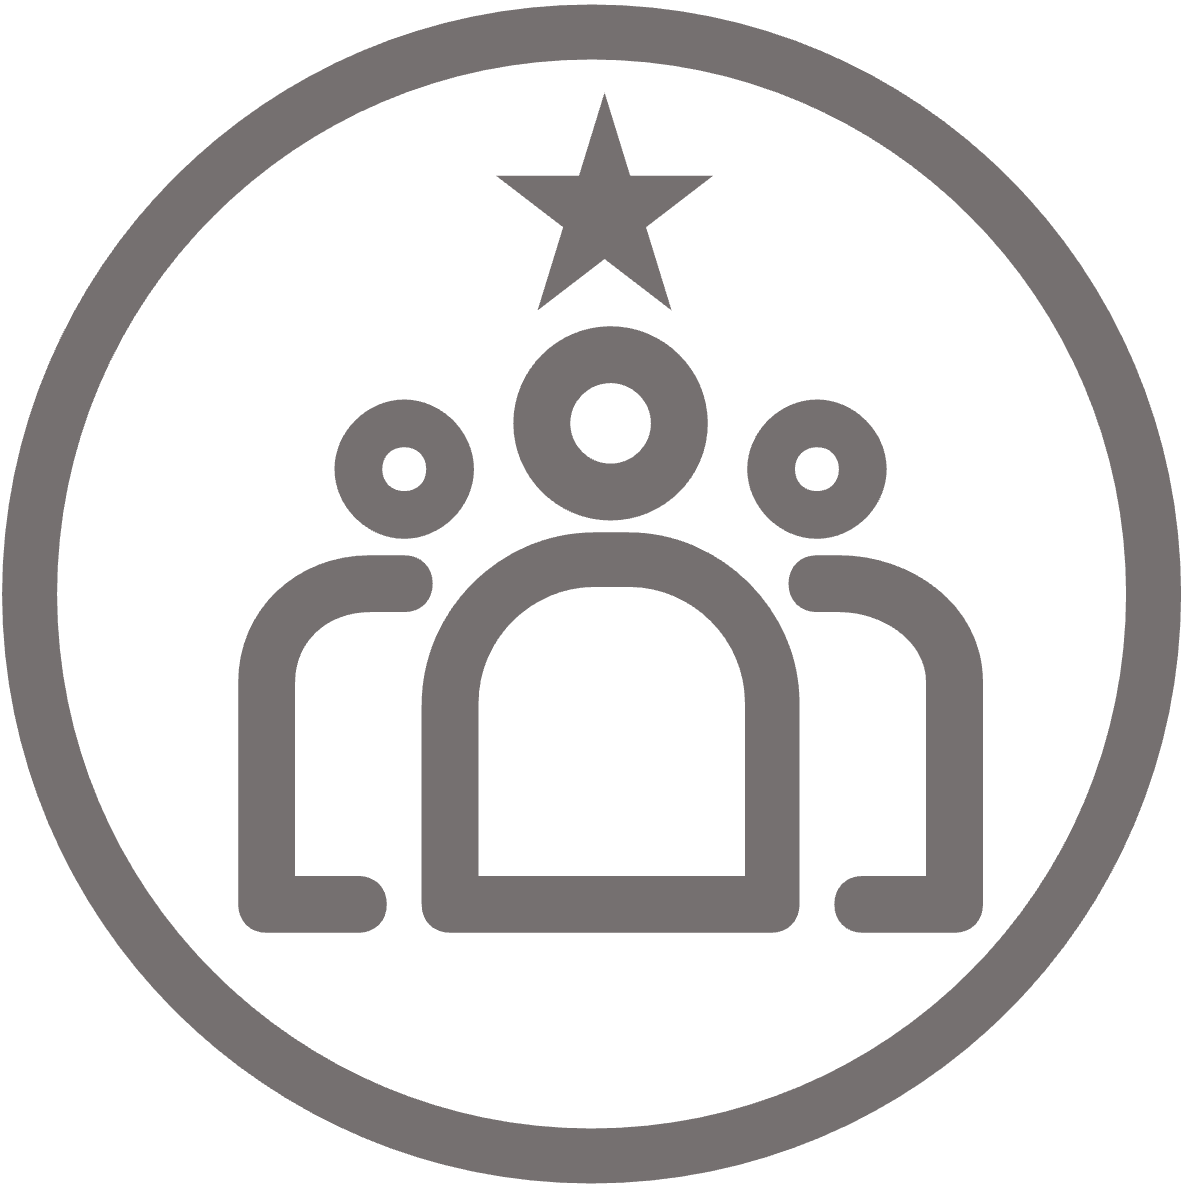 Icon of three people inside a circle with star above middle person